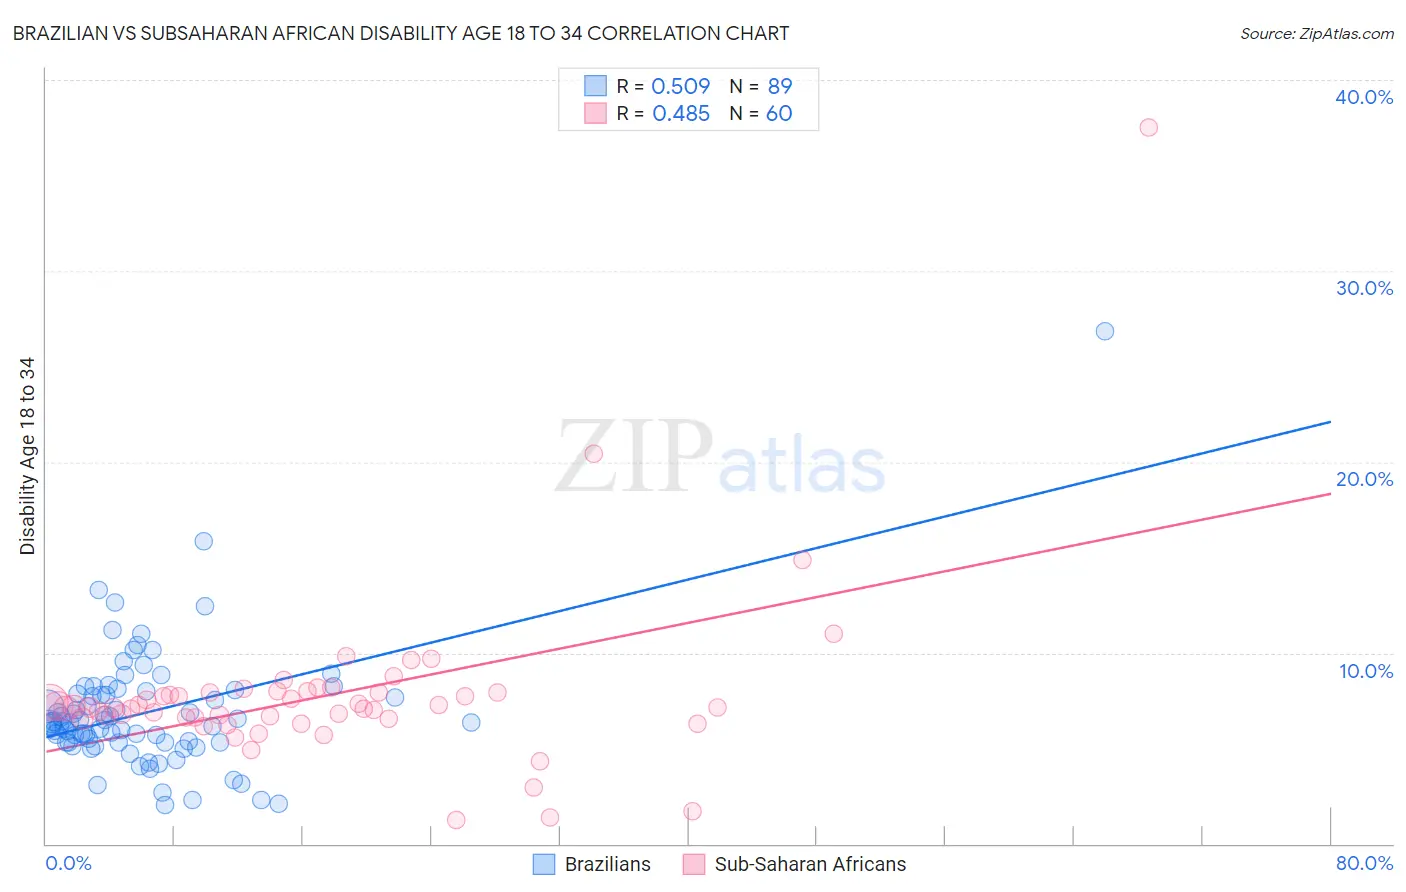 Brazilian vs Subsaharan African Disability Age 18 to 34